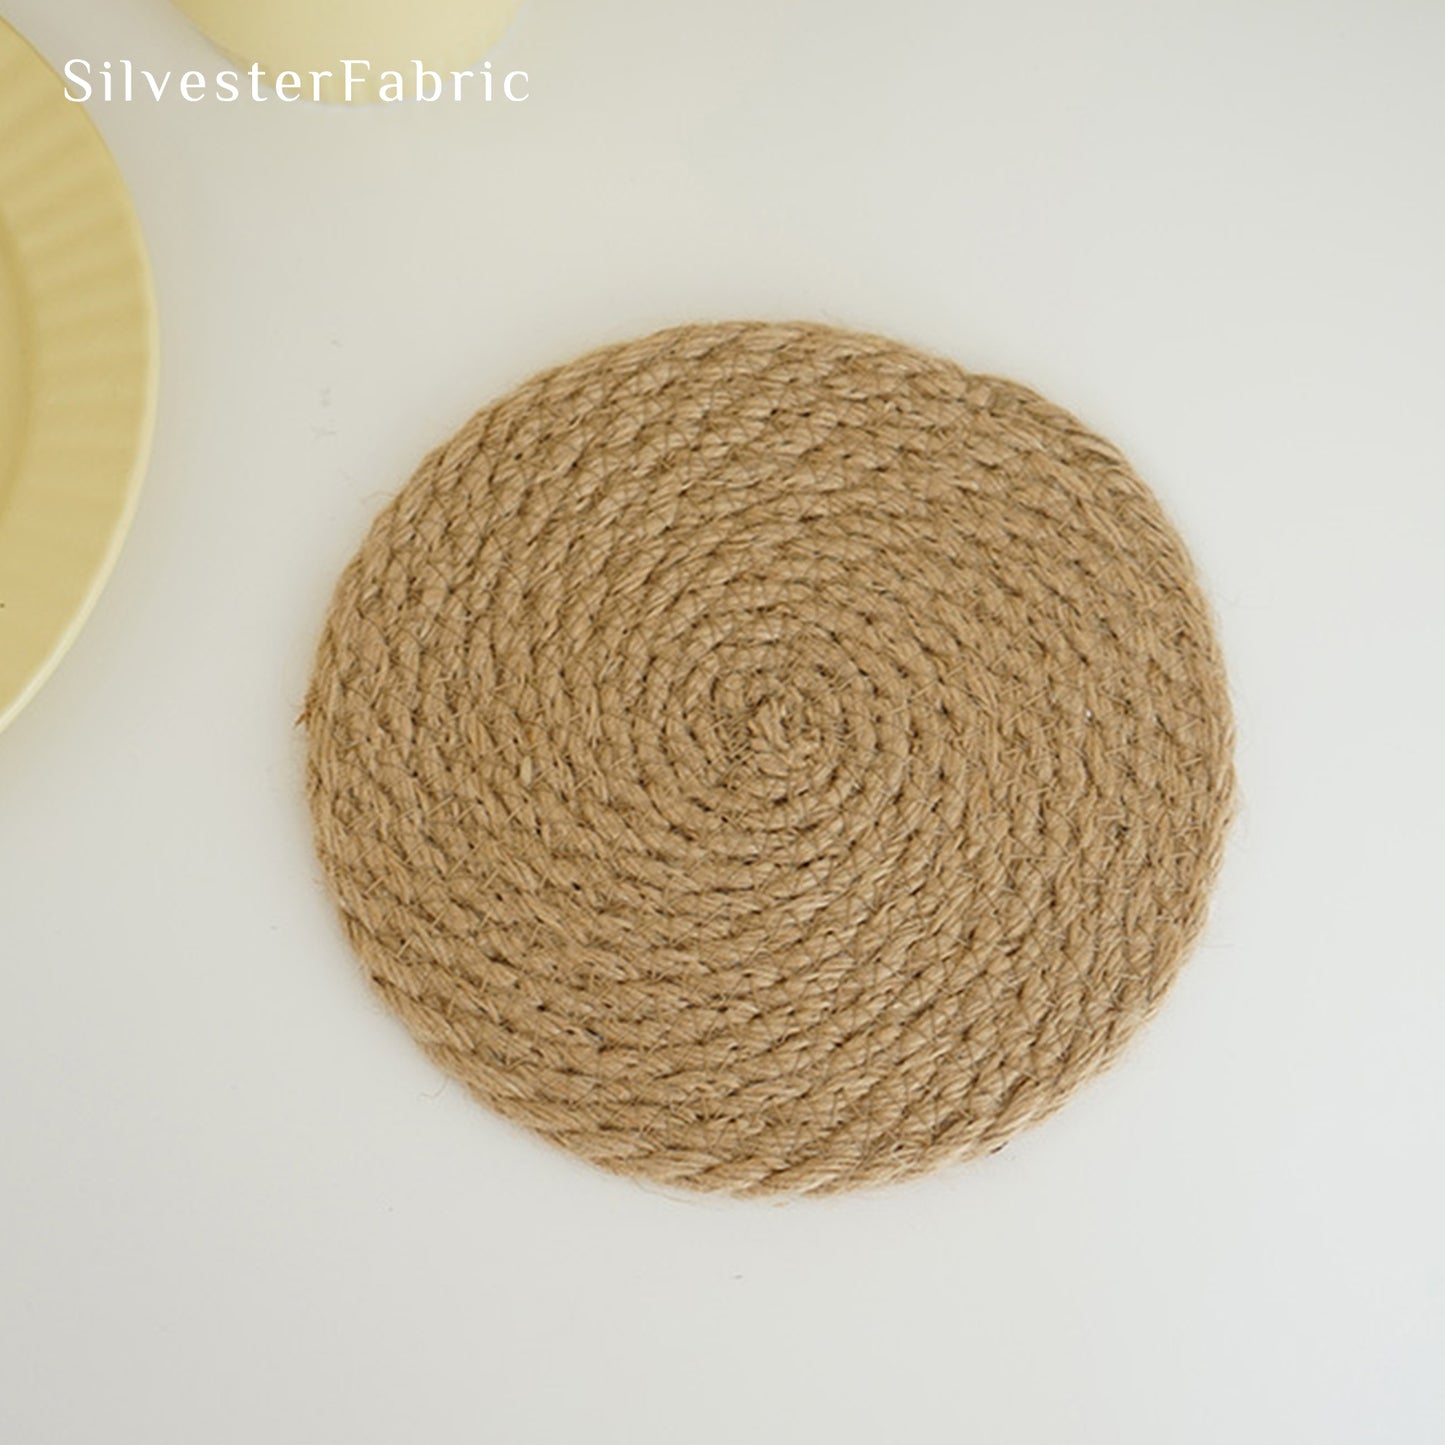 7" Round Woven Table Placemats